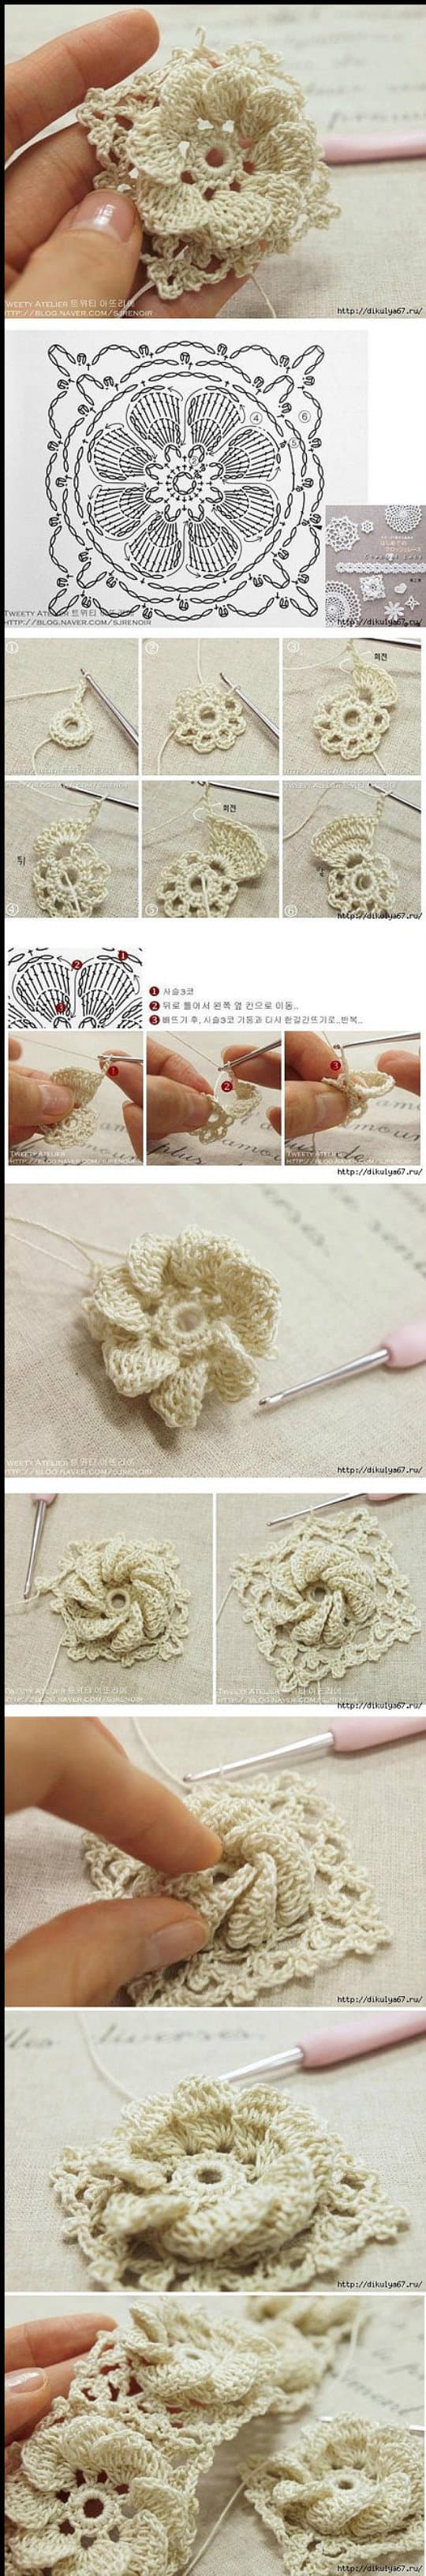 https://up.rozbano.com/view/3639072/knitted%203D%20Flower%20in%20a%20Square%20tutorial-01.jpg